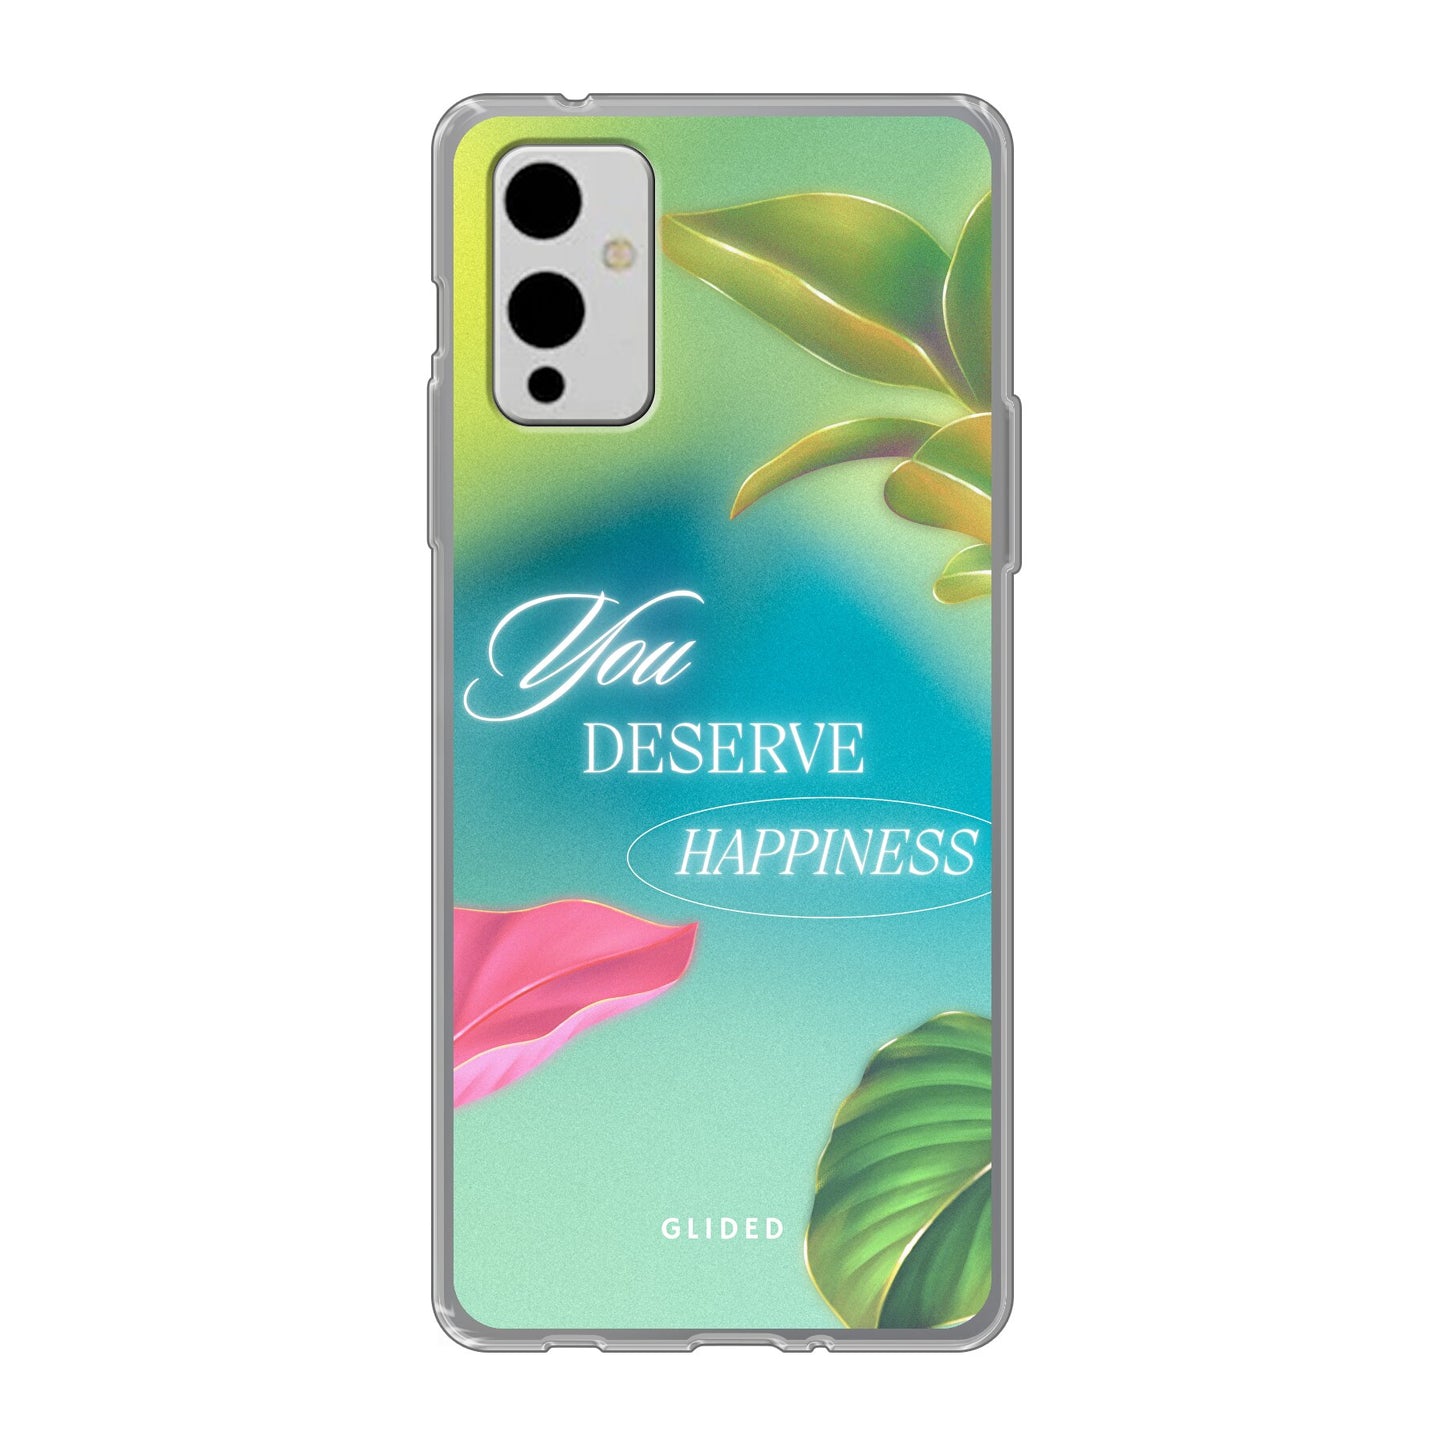 Happiness - OnePlus 9 - Tough case